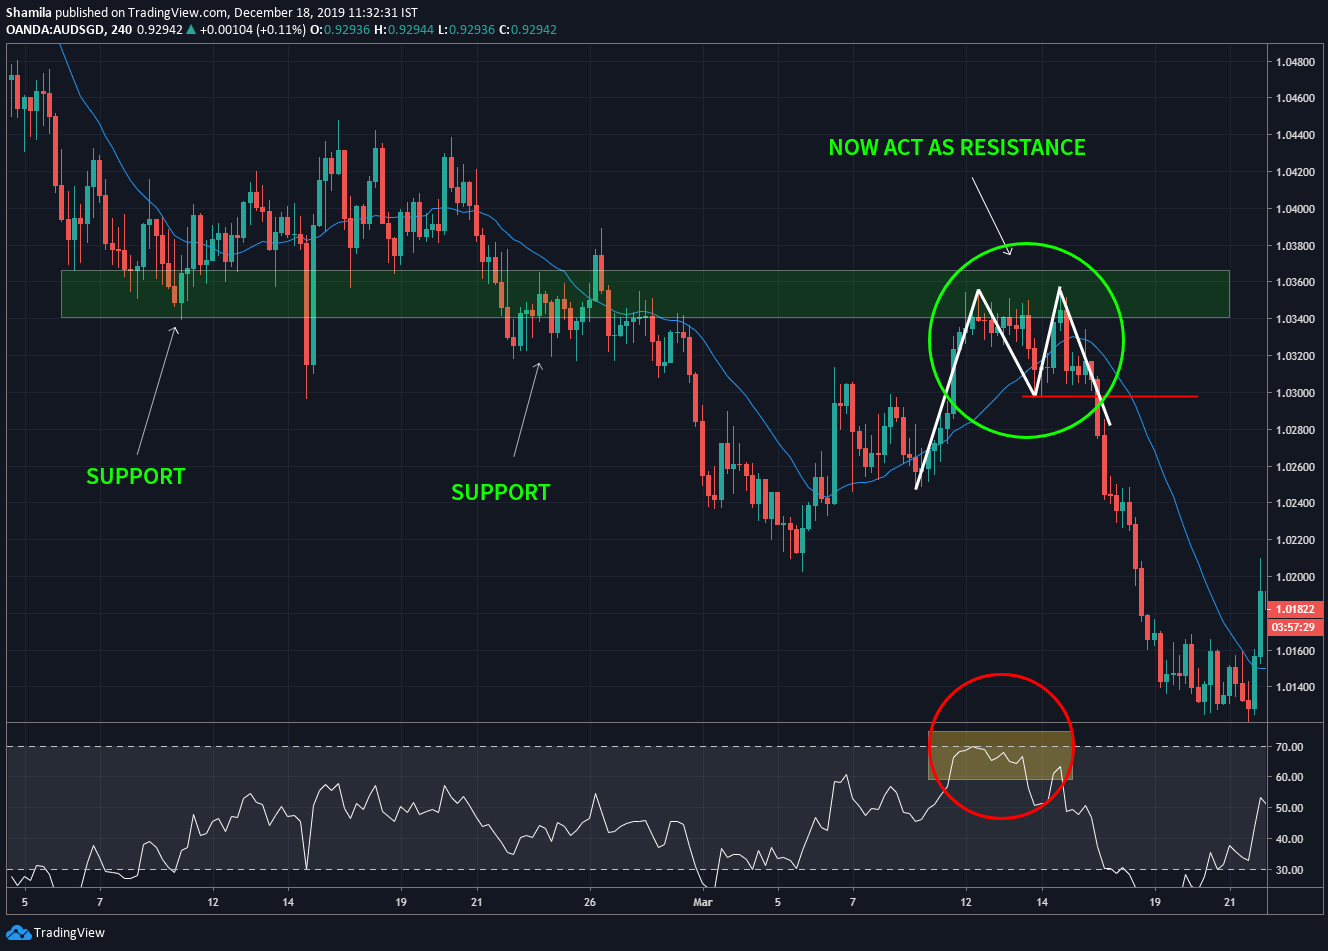 support turn into resistance